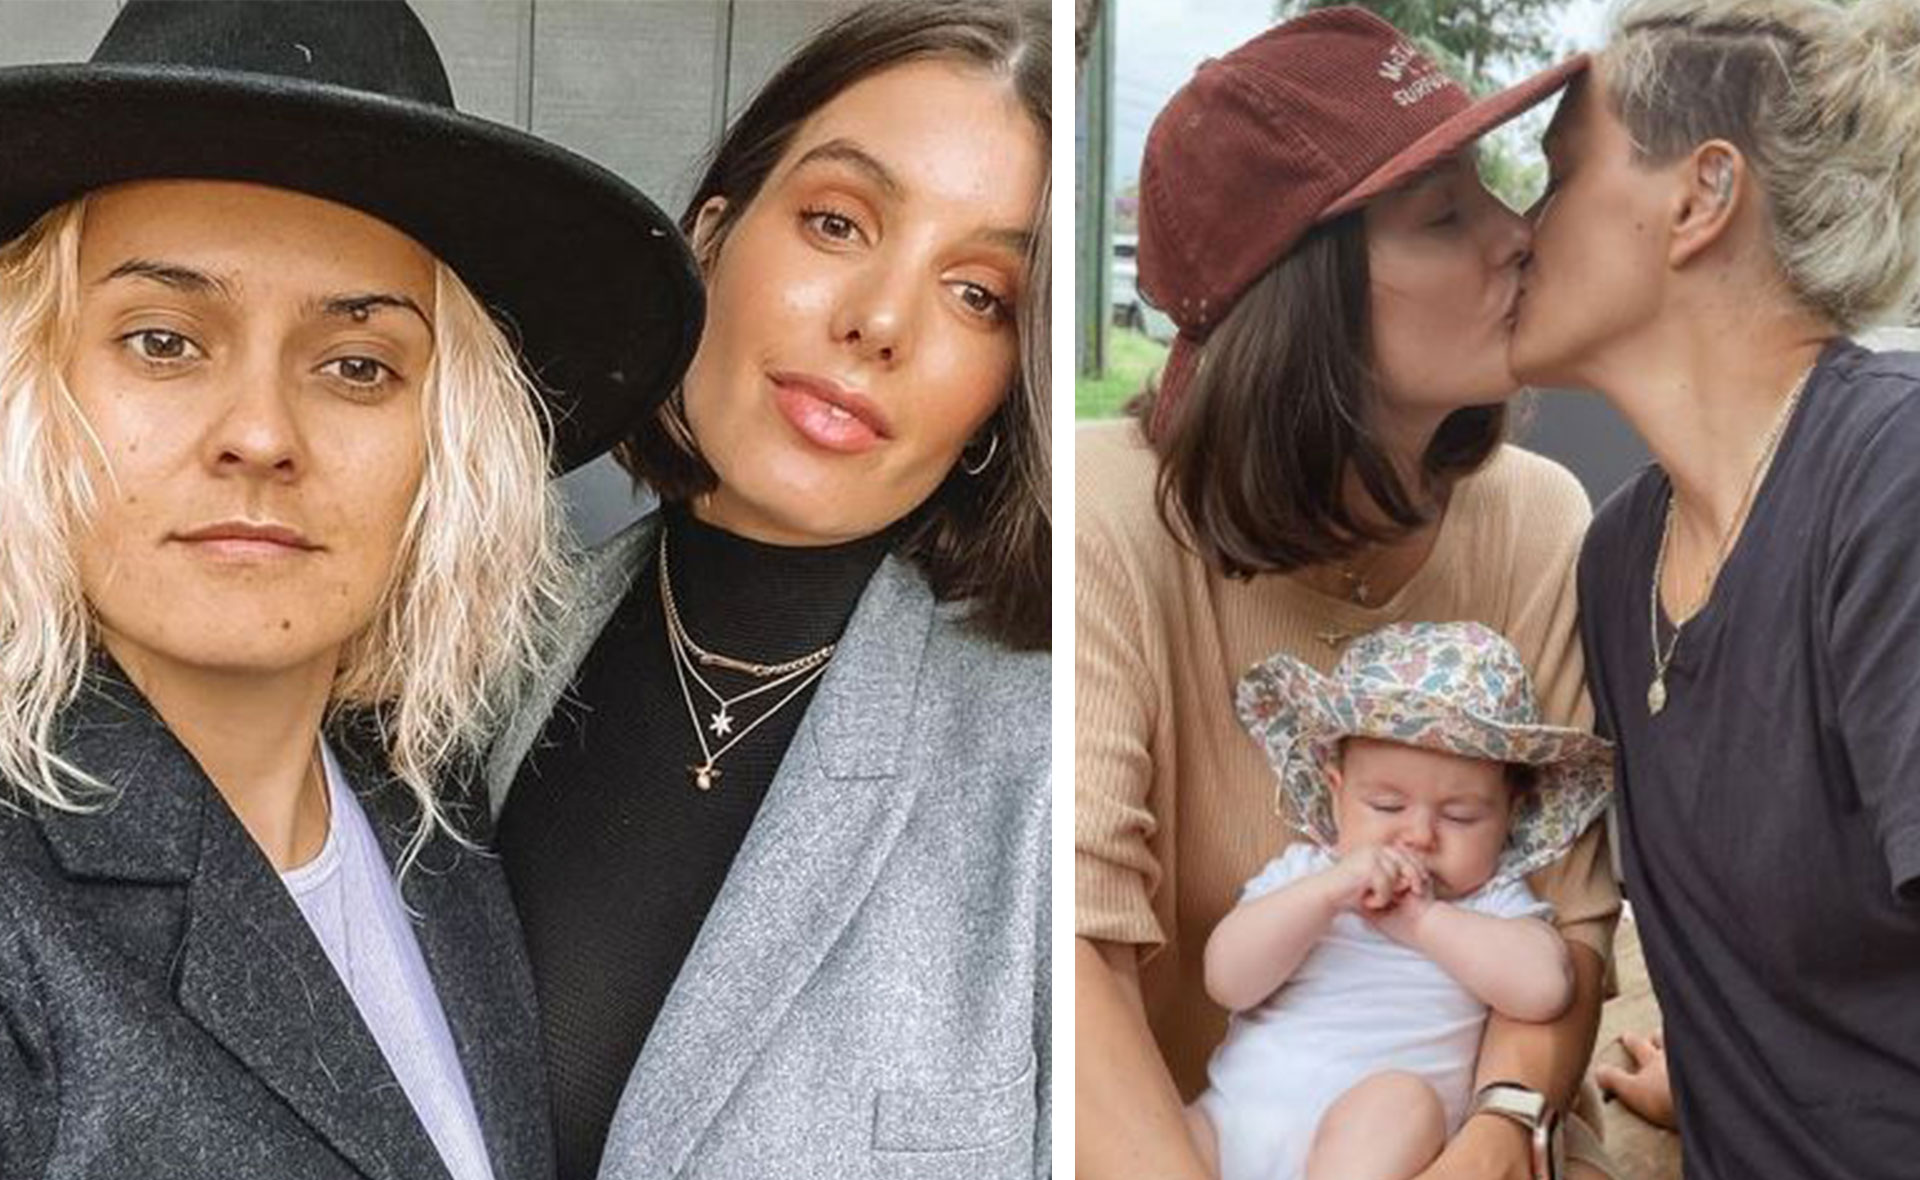 “I want a houseful of babies!” Moana Hope reveals her exciting pregnancy plans with wife Isabella Carlstrom